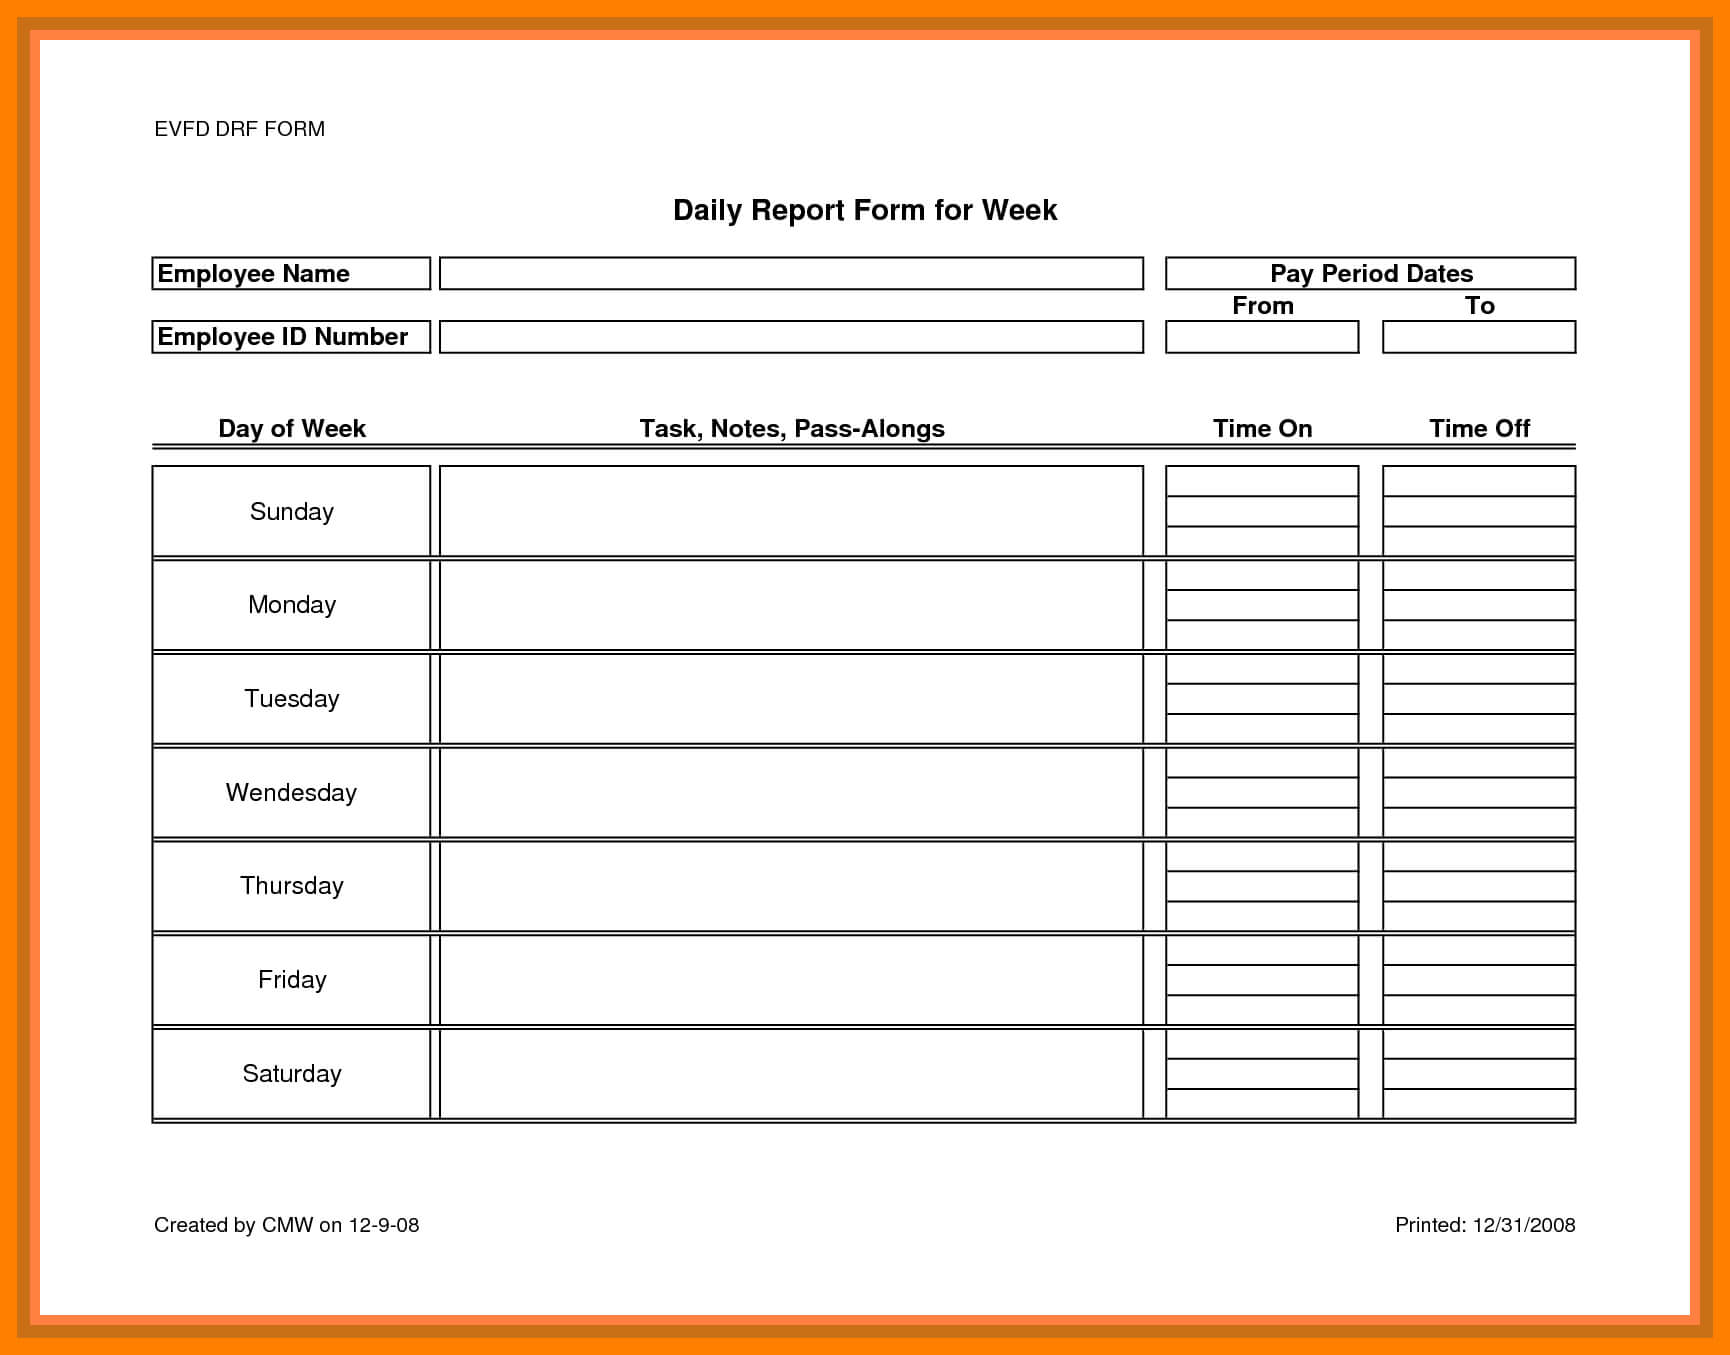 007 Daily Work Report Template Ideas Reports Business Pertaining To Employee Daily Report Template